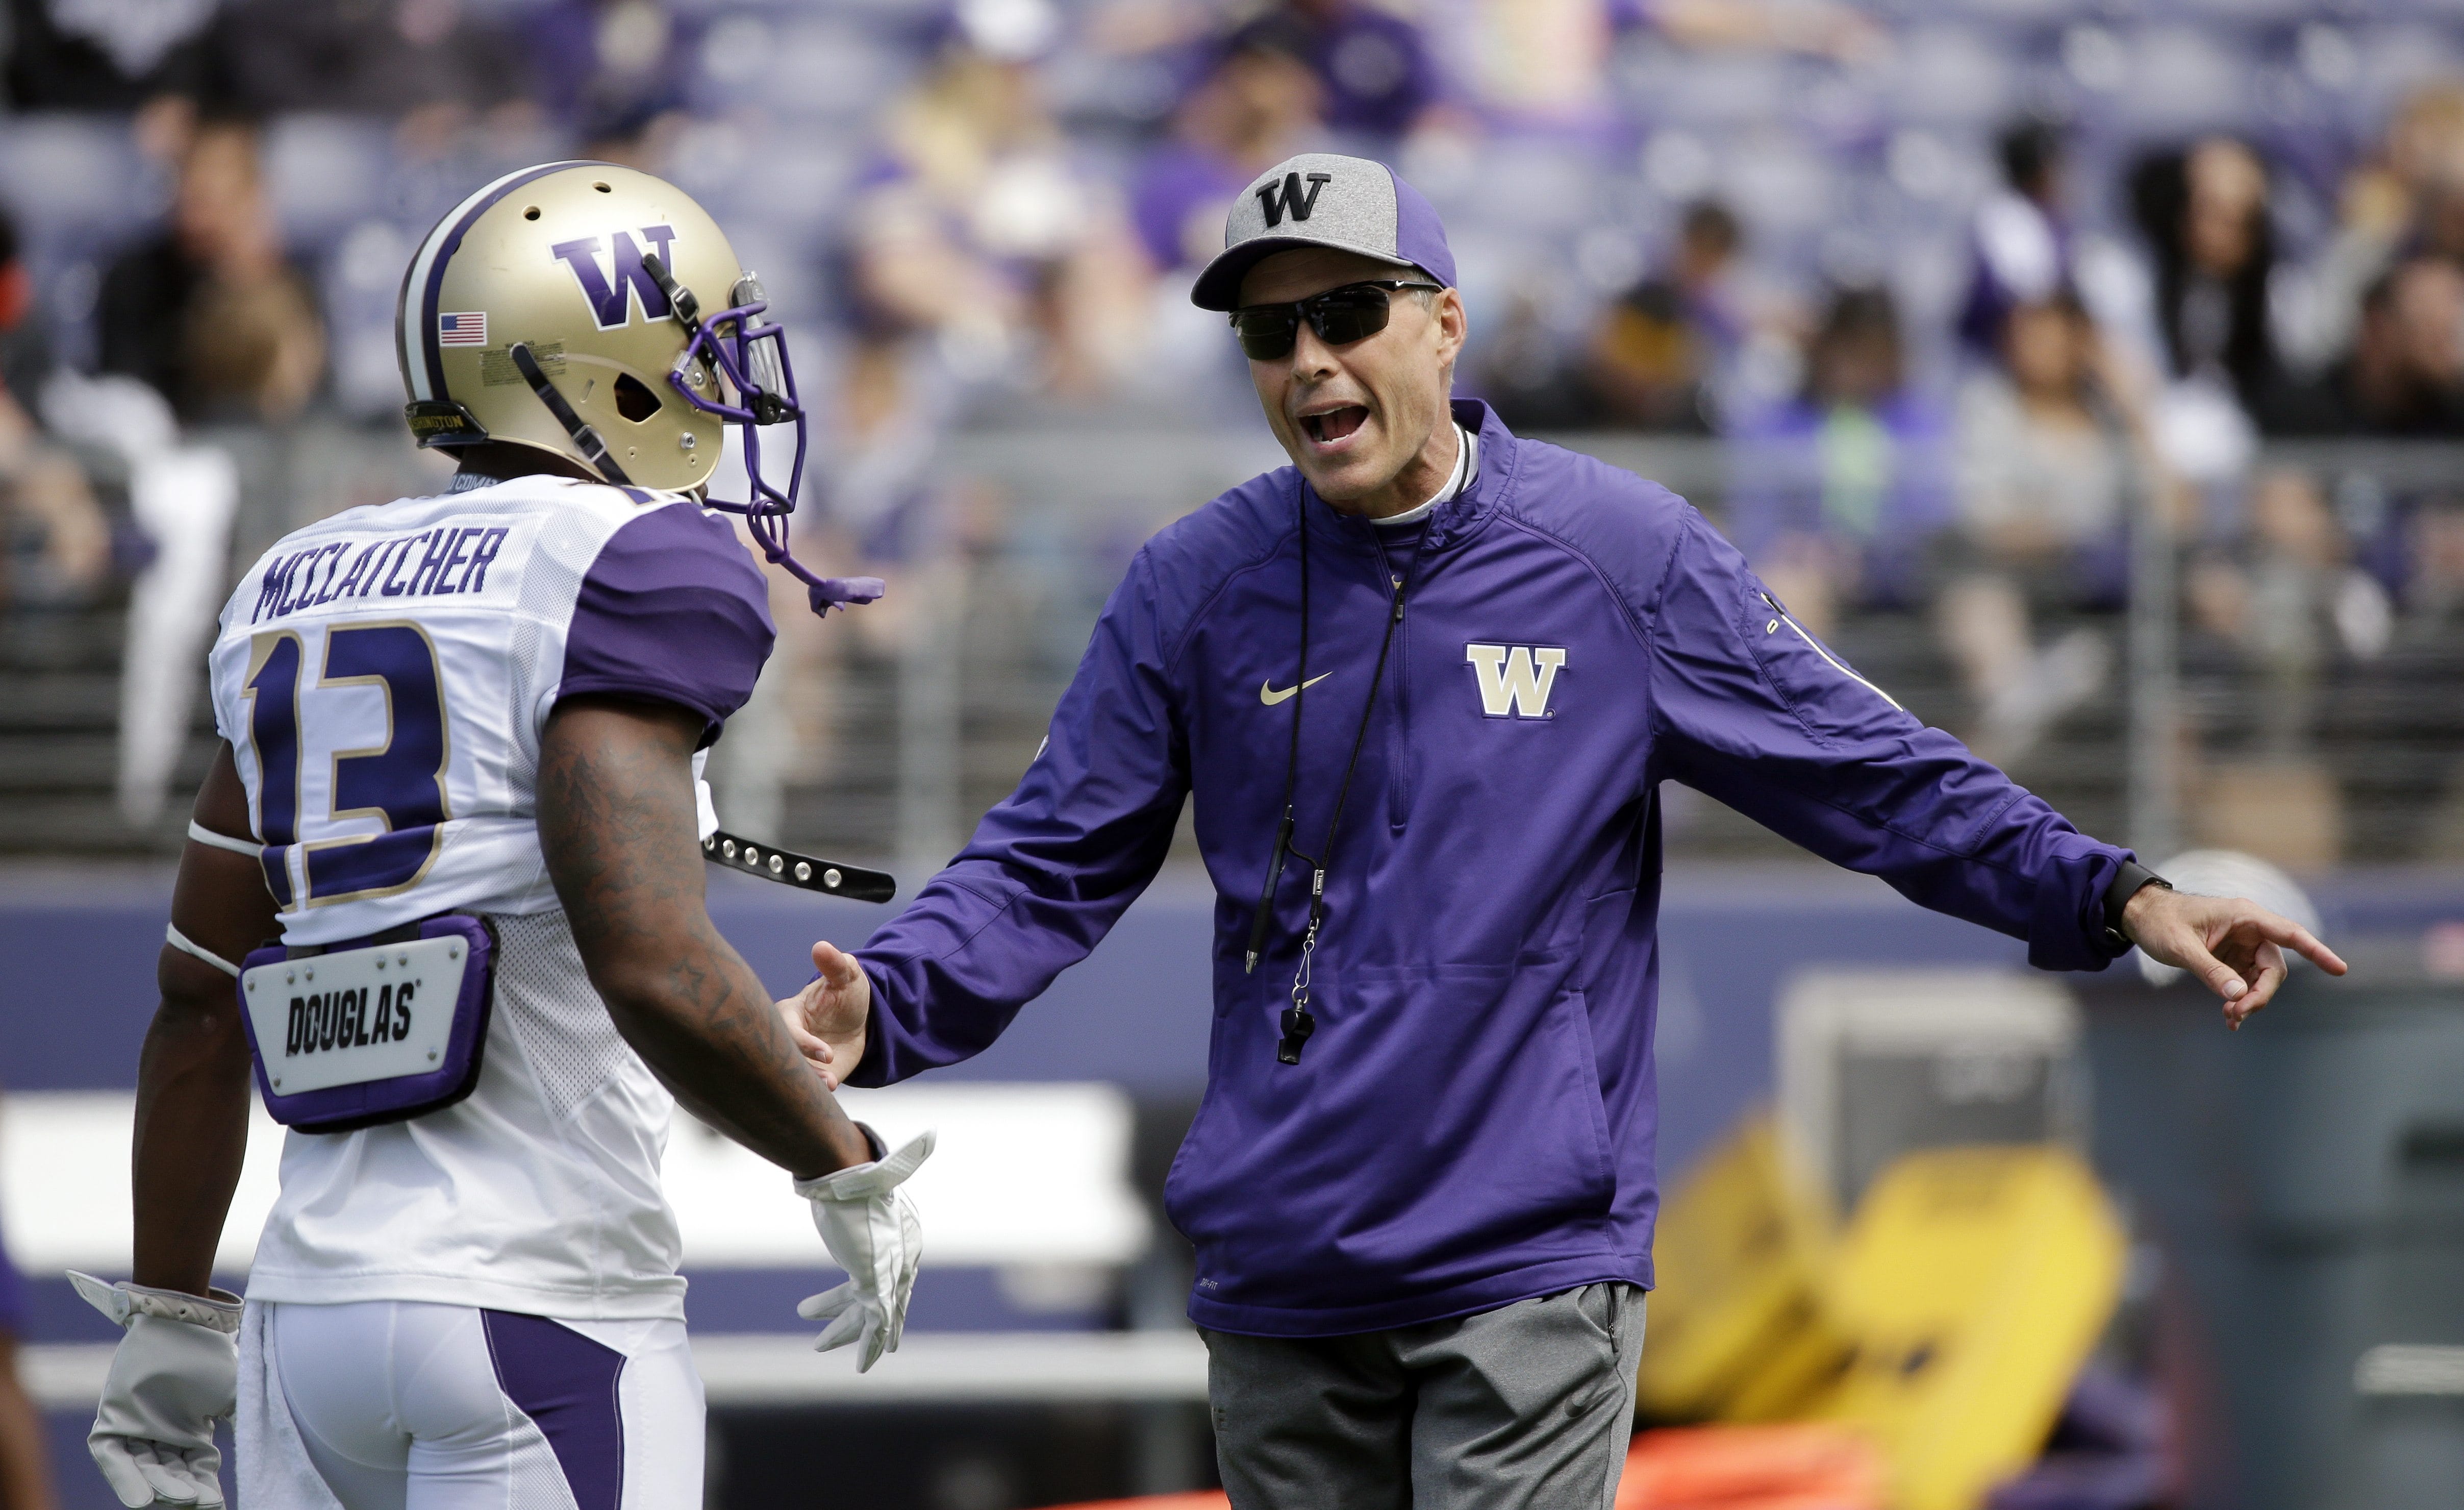 Washington head coach Chris Petersen, right, talks with Chico McClatcher at the team's annual spring preview football event Saturday, April 23, 2016, in Seattle.